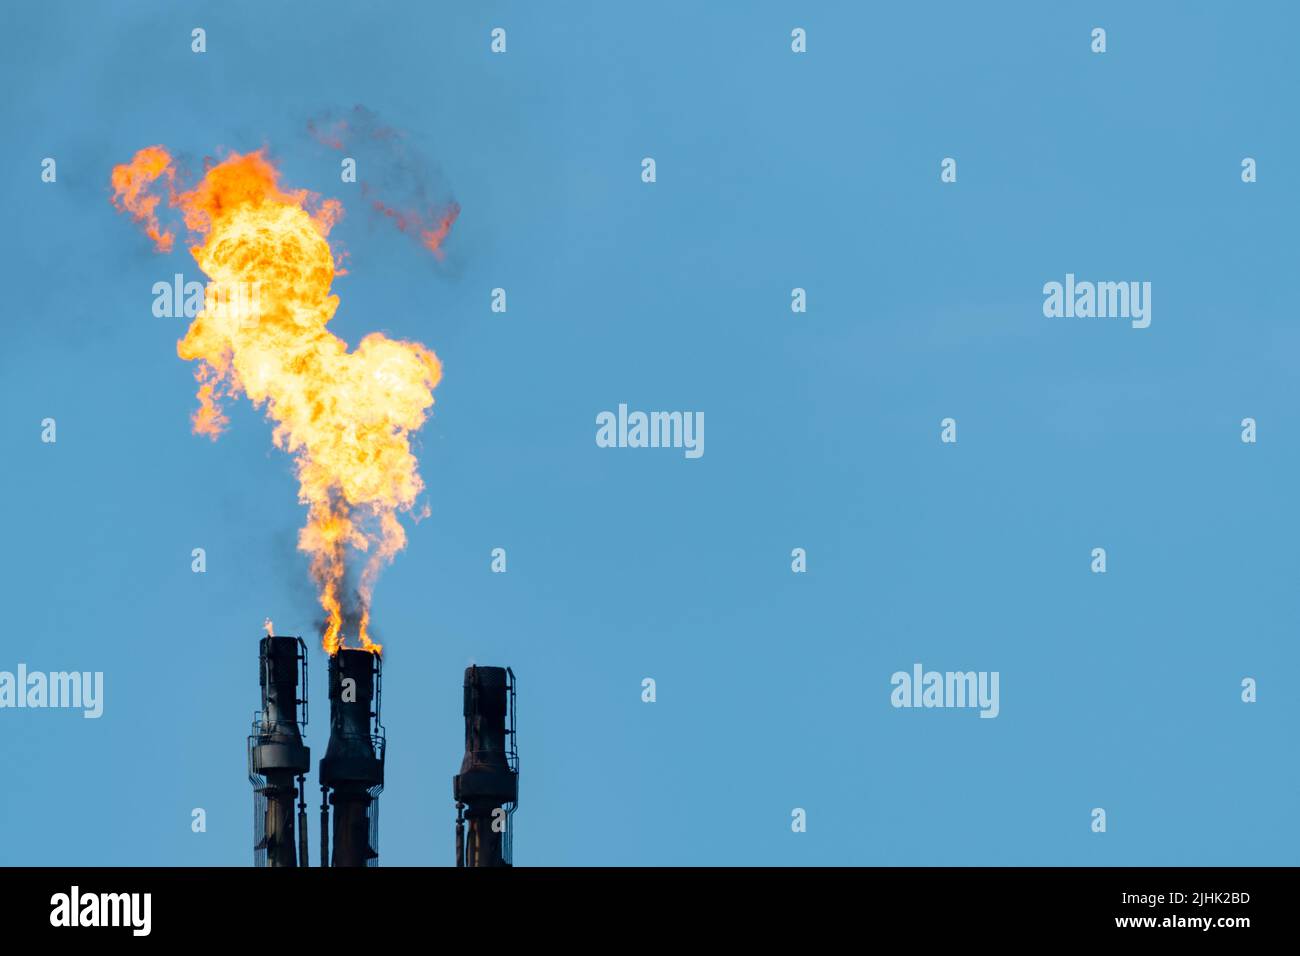 Oil refinery gas flare, flare stack burning off excess gas. Copy space right. Oil refinery flame, flare, flaring, chimney, pollution, smokestack. UK Stock Photo